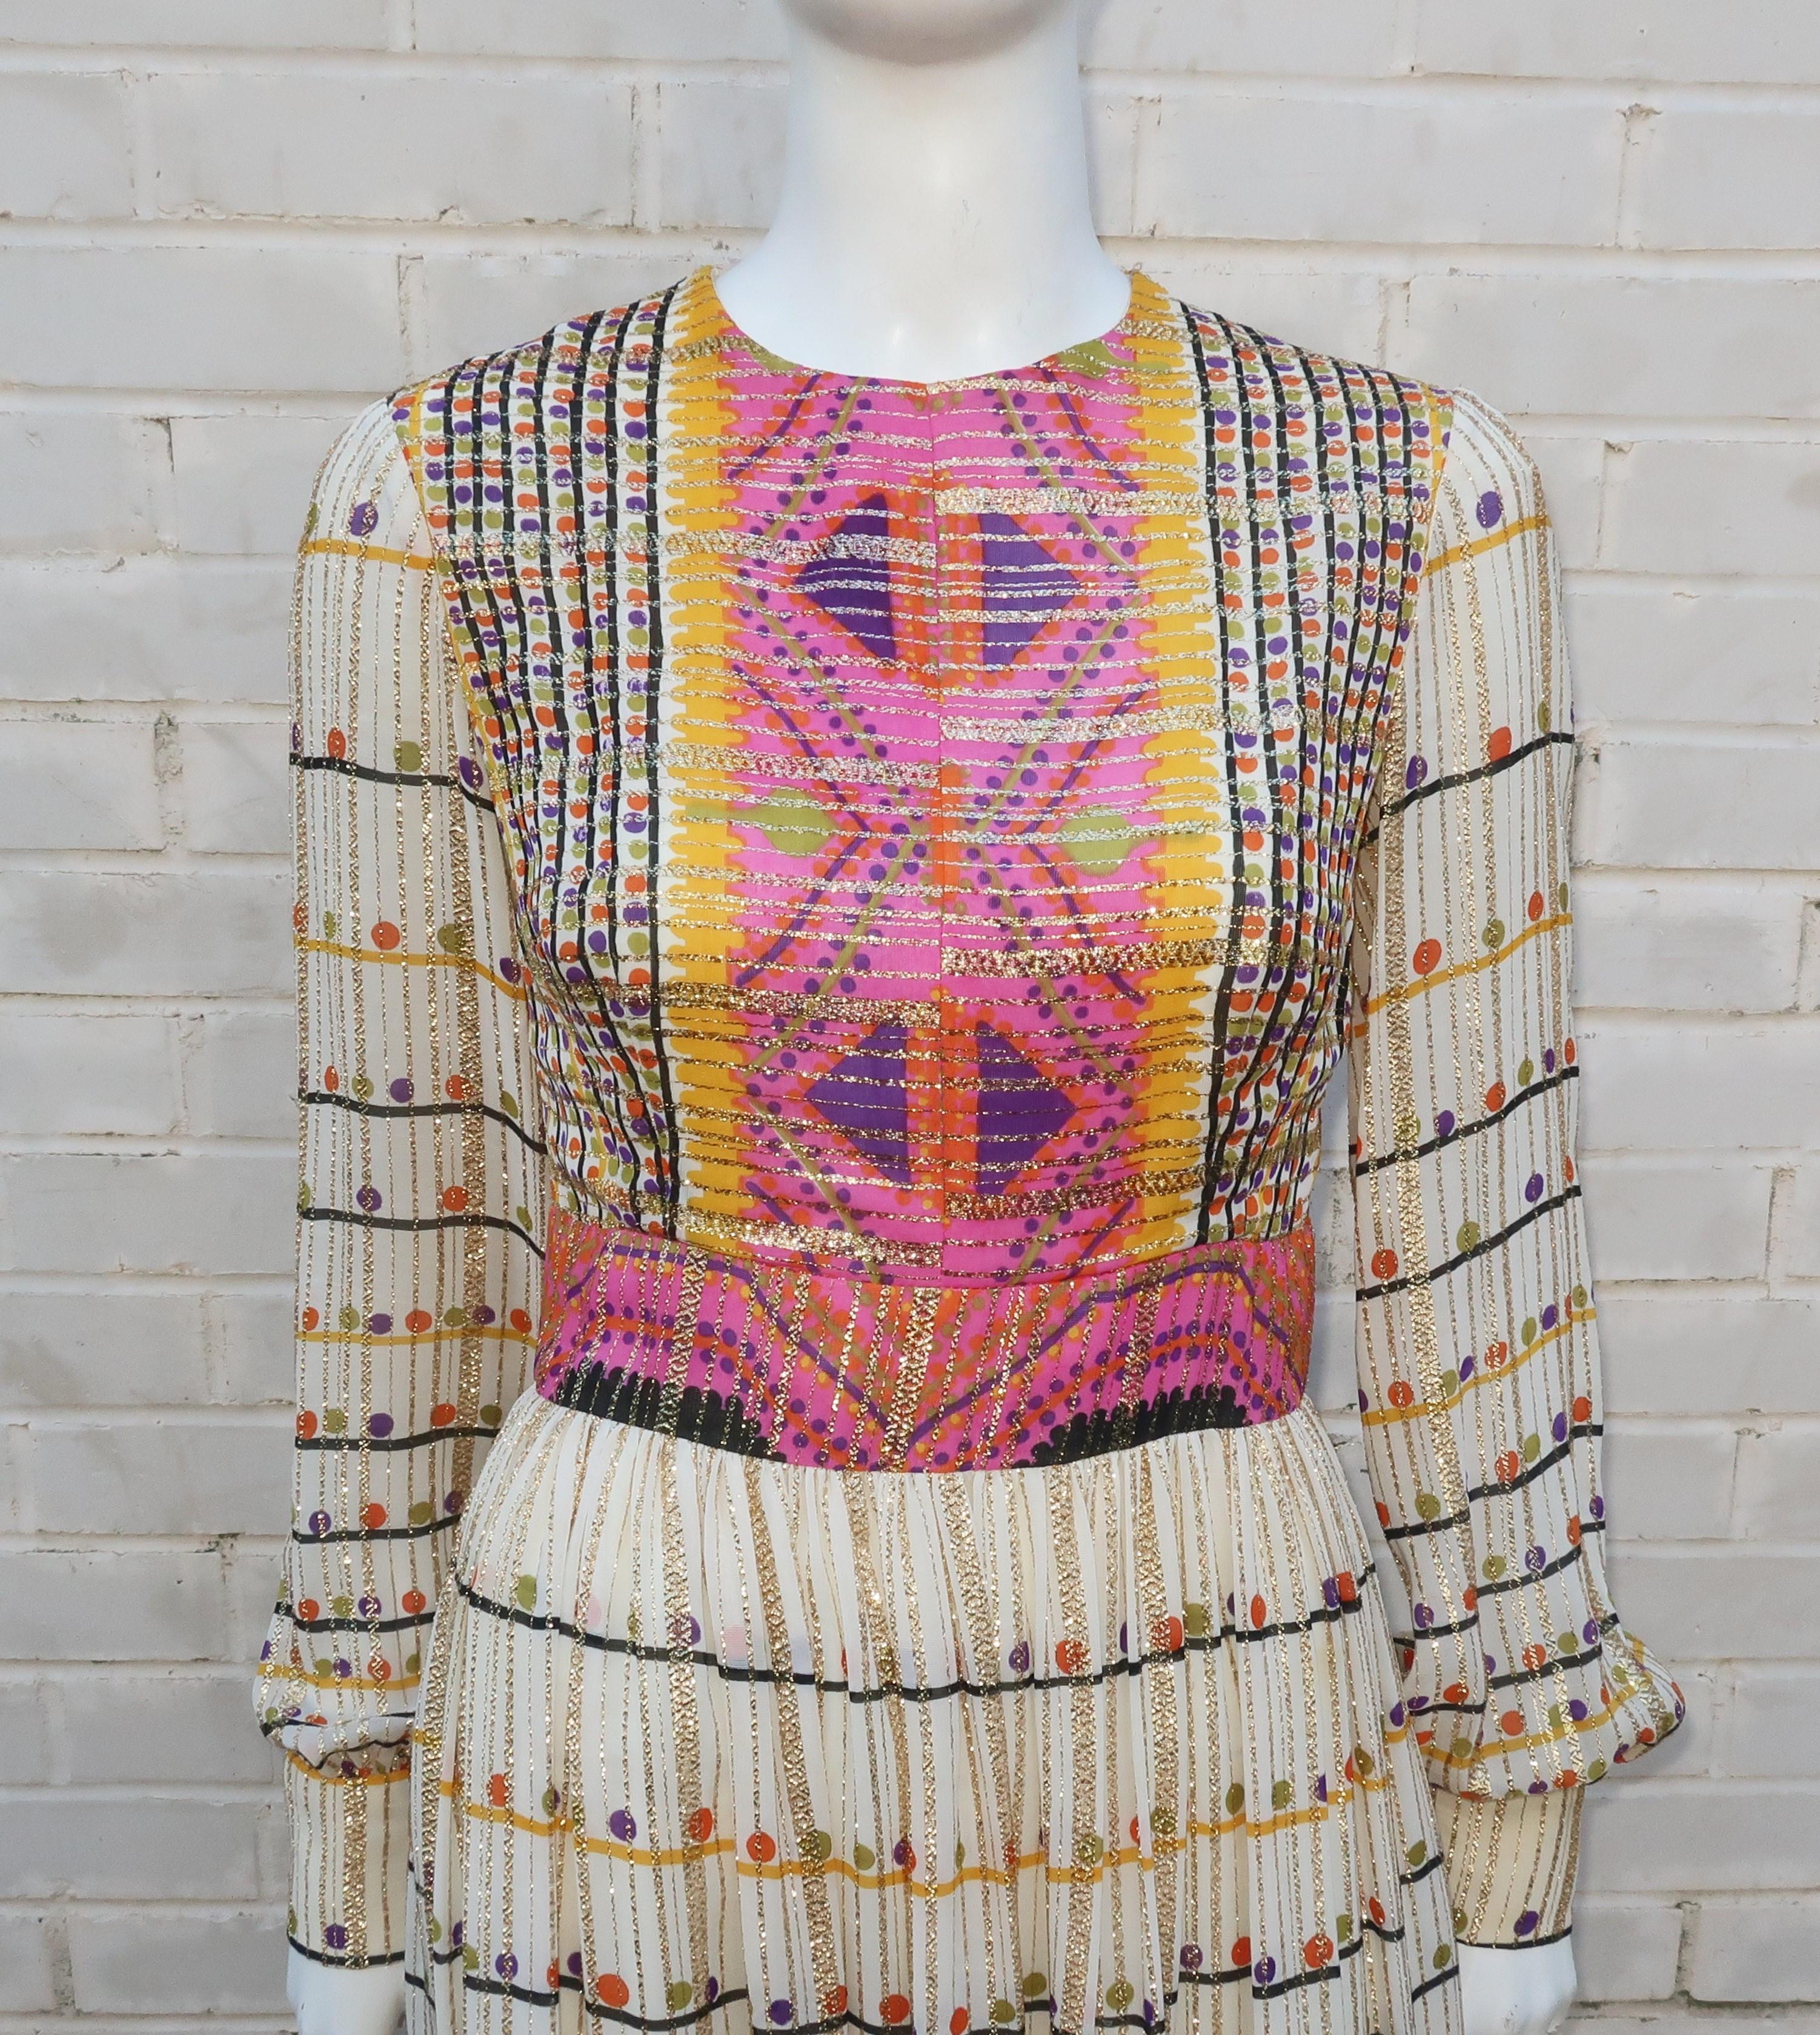 Mod, maxi and marvelous!  This 1960's Neiman Marcus label gold lamé dress is designed with an eye catching geometric print fabric in bright shades of hot pink, purple, yellow, olive green and black.  It zips and hooks at the back with blousy sleeves